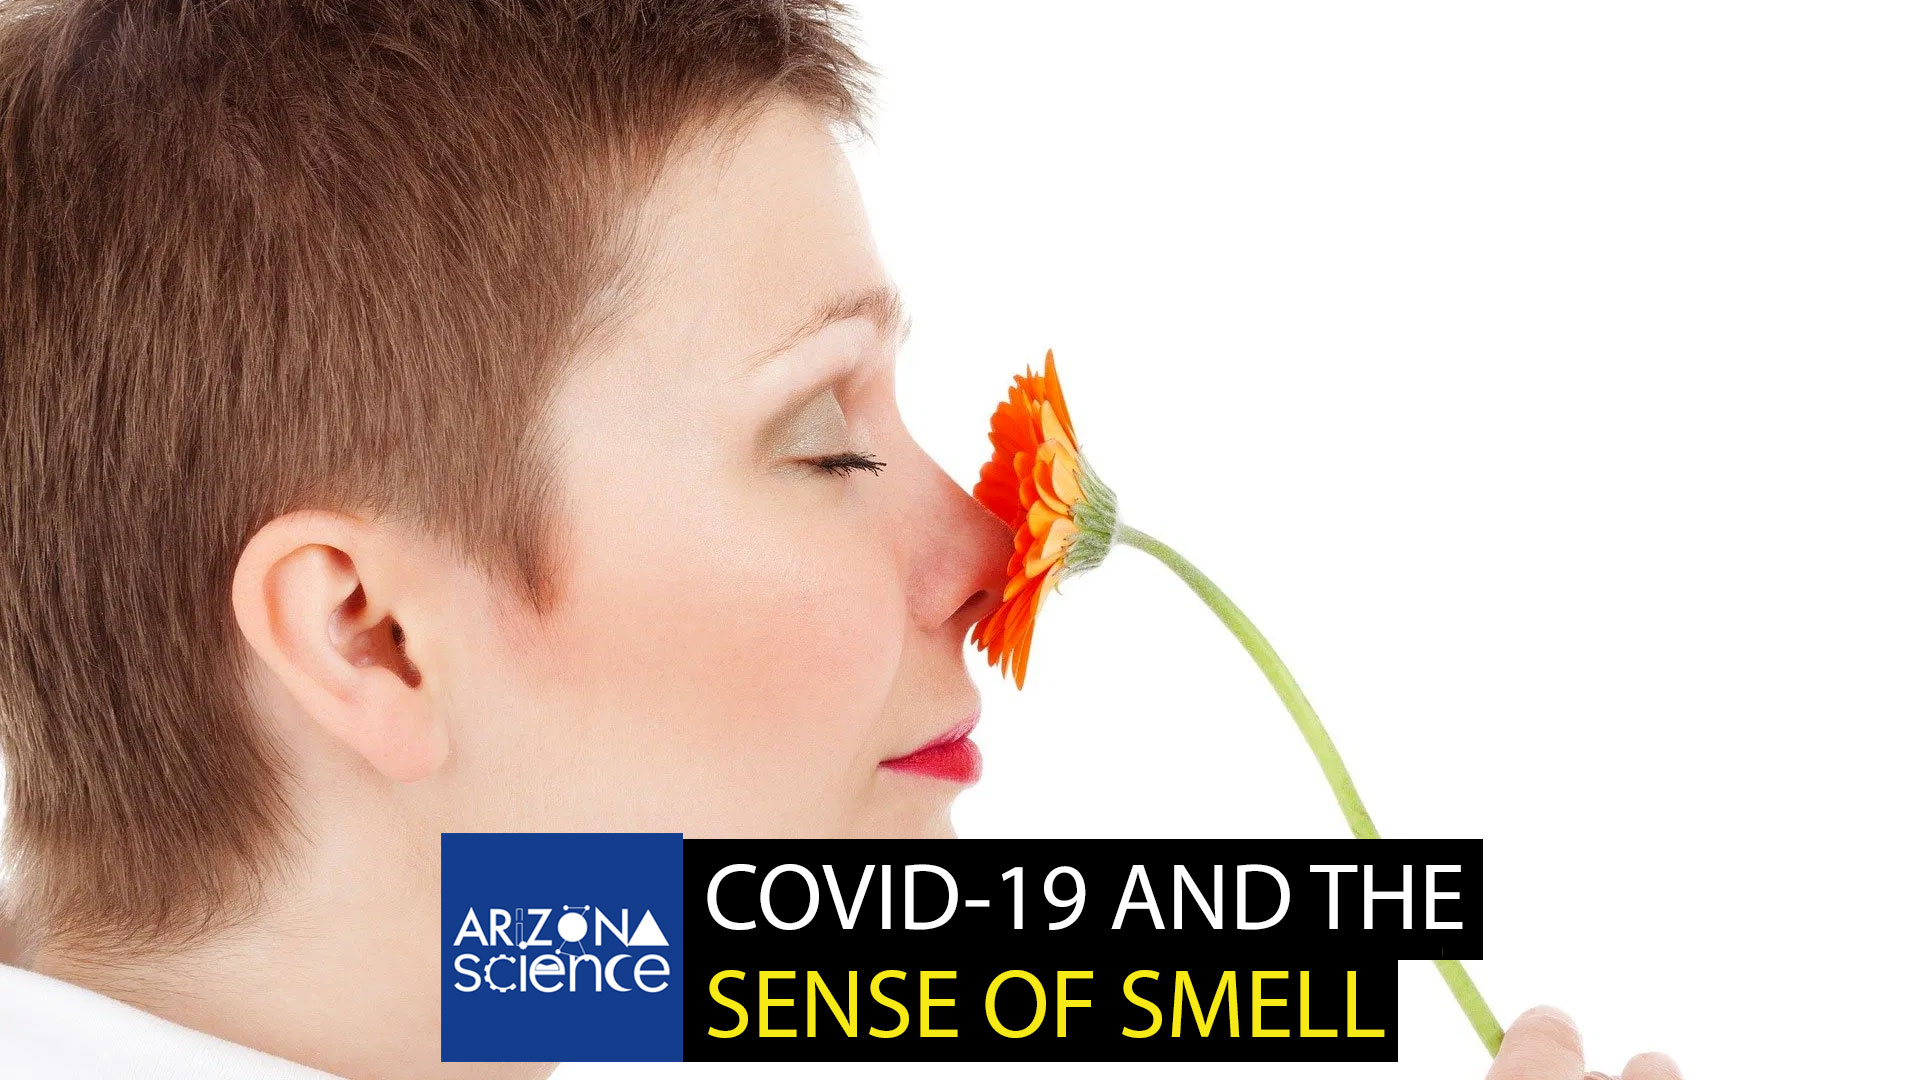 COVID-19 patients report changes in their sense of smell.